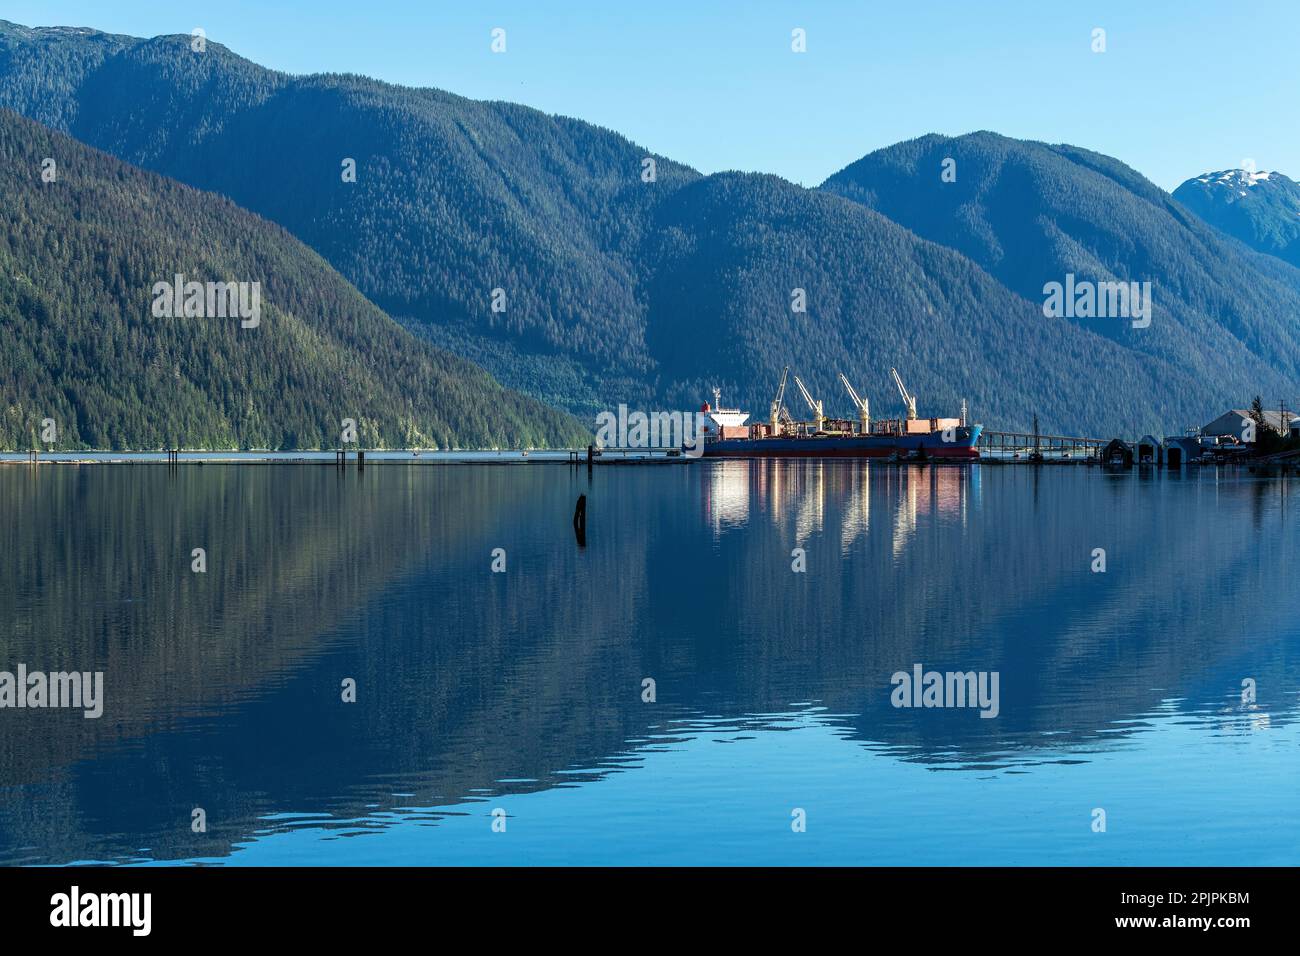 Tanker ship for industrial transport in the harbor of Stewart, British Columbia, Canada. Stock Photo